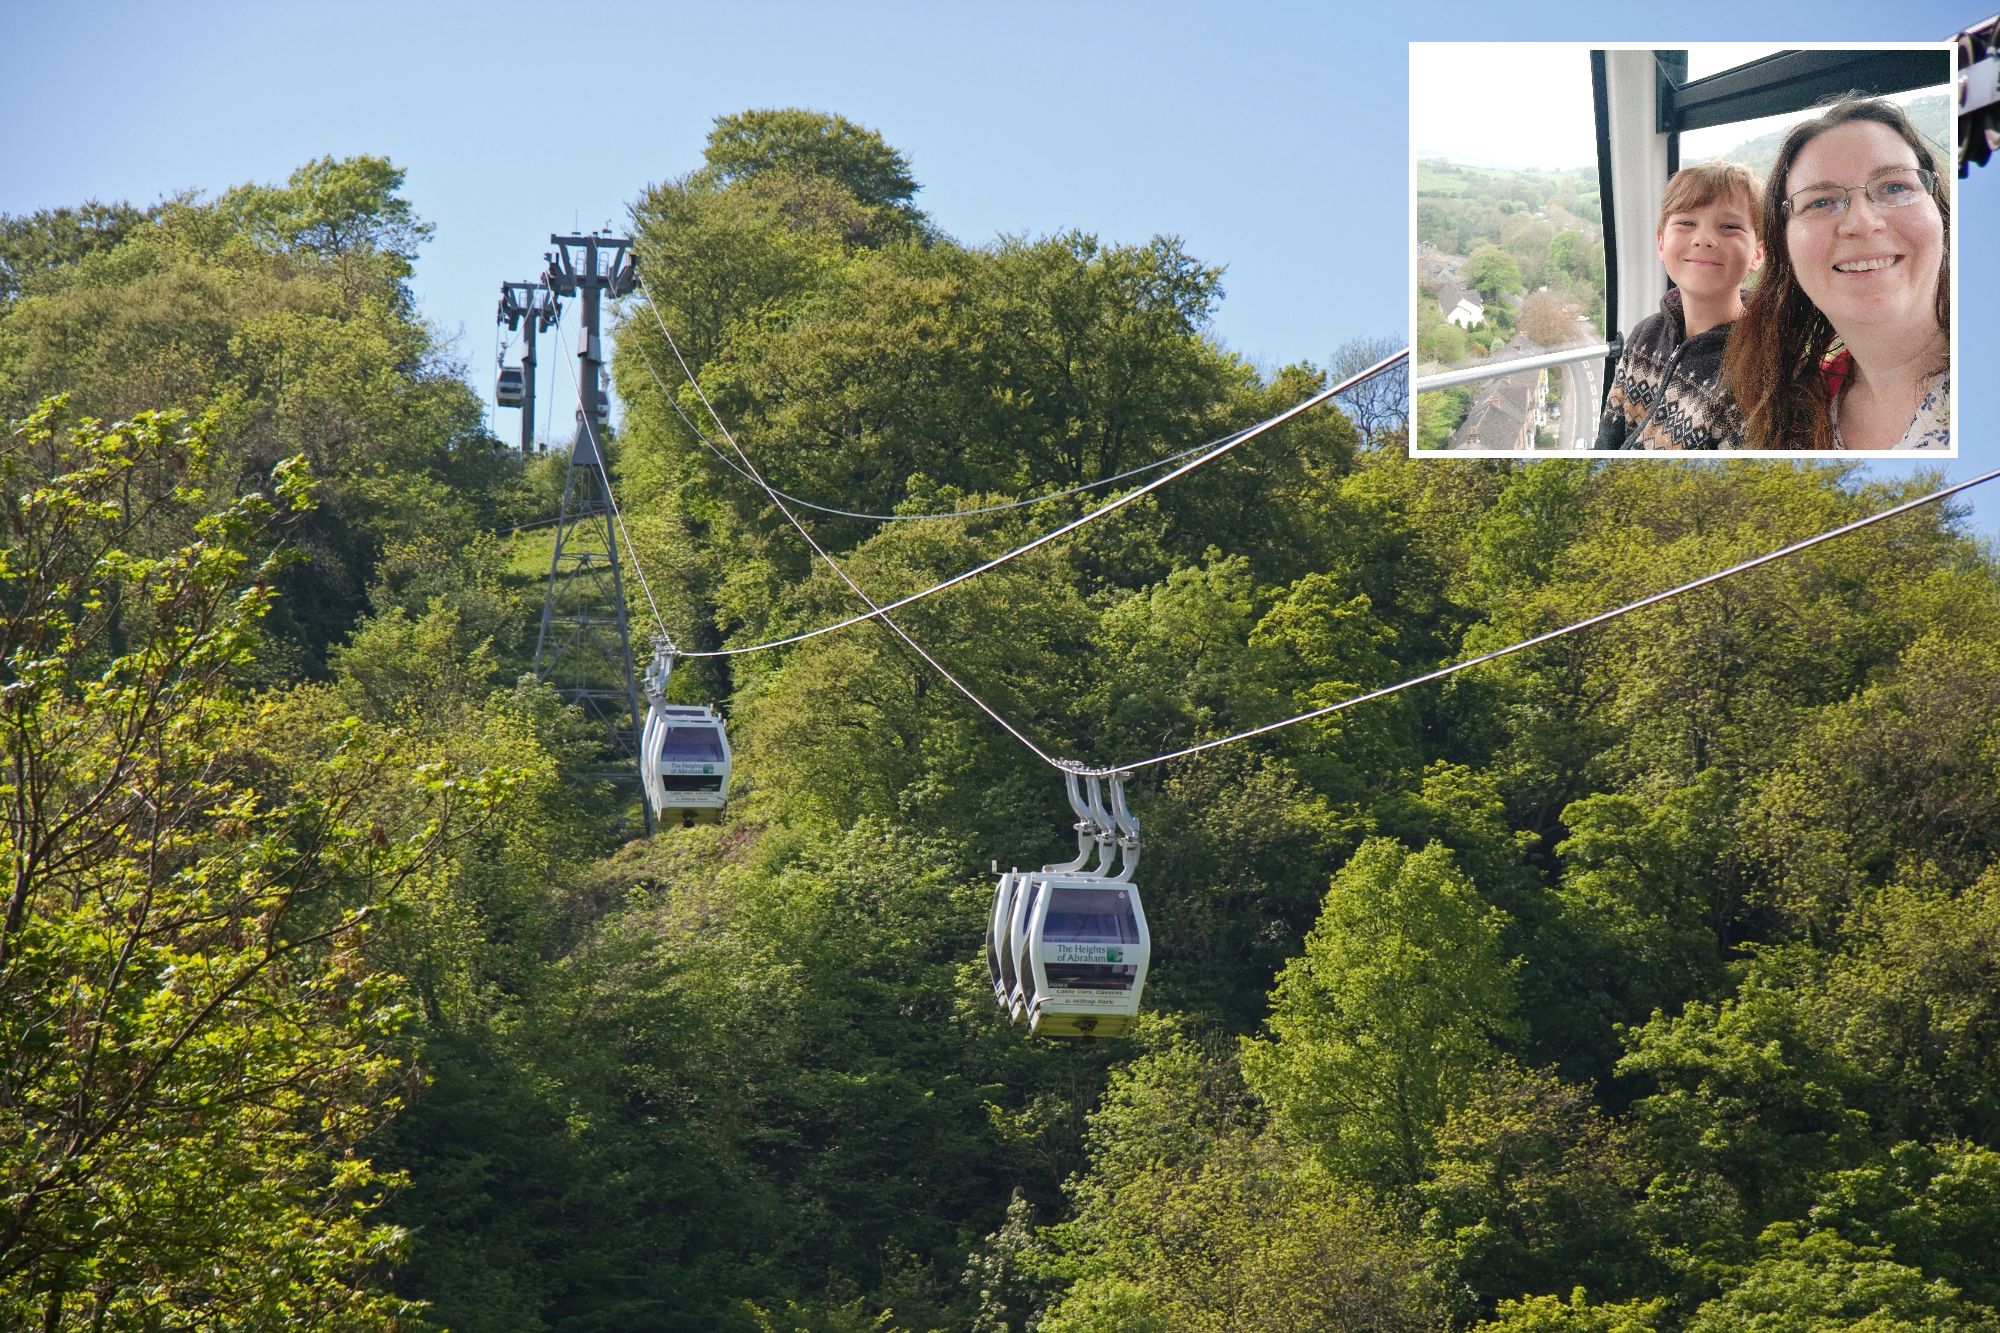 I visited a 40-year-old UK attraction - and it was like going to the Alps